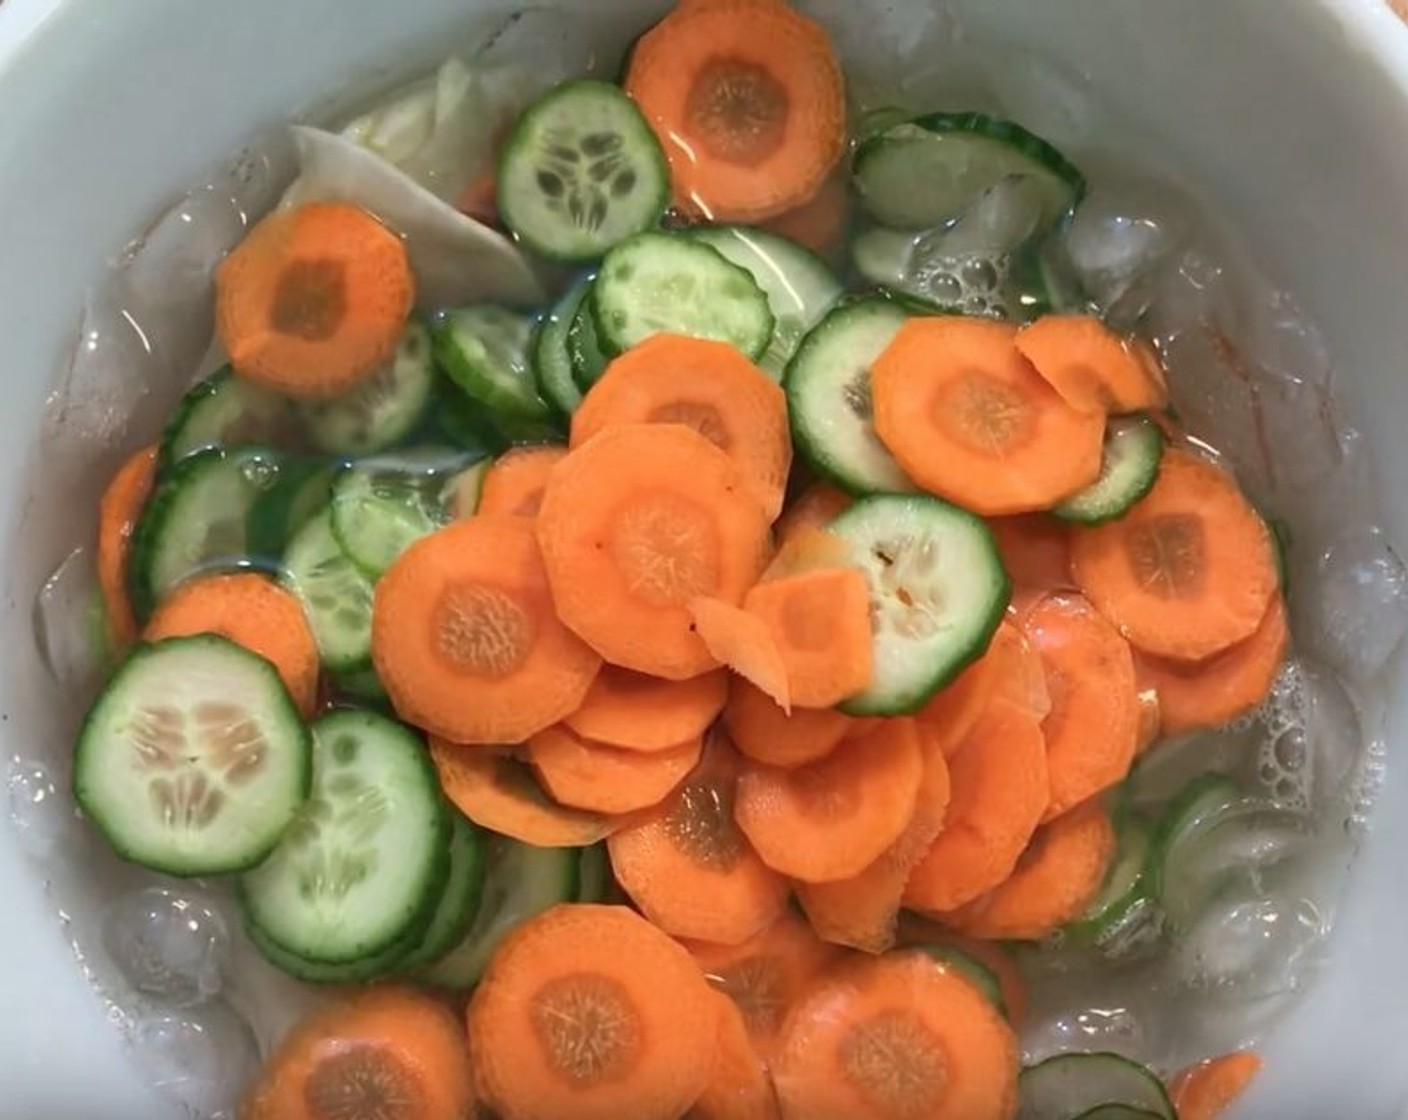 step 2 Submerge the Carrot (1), Armenian Cucumbers (2), and Kohlrabi (3) in ice water and let stand for about 15 minutes.